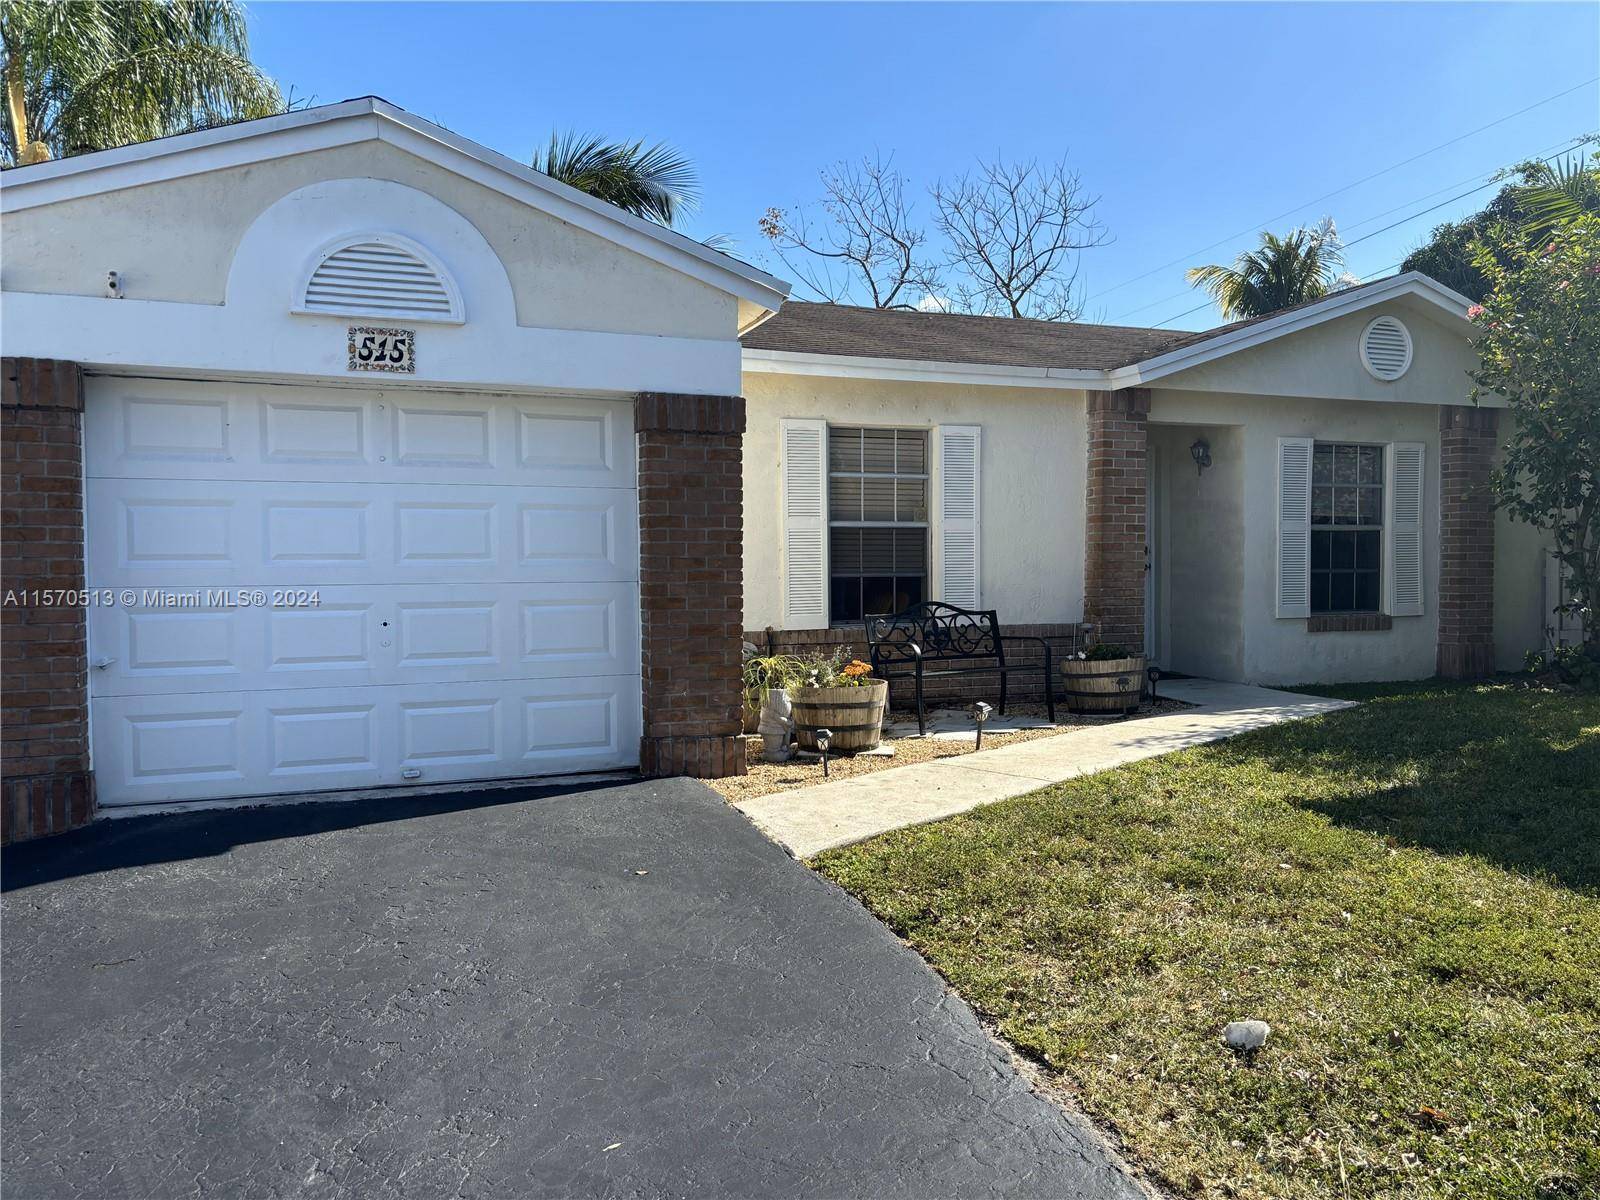 This charming home in Shenandoah of West Davie has 3 bedrooms and 2 bathrooms plus an extra bedroom with a closet.